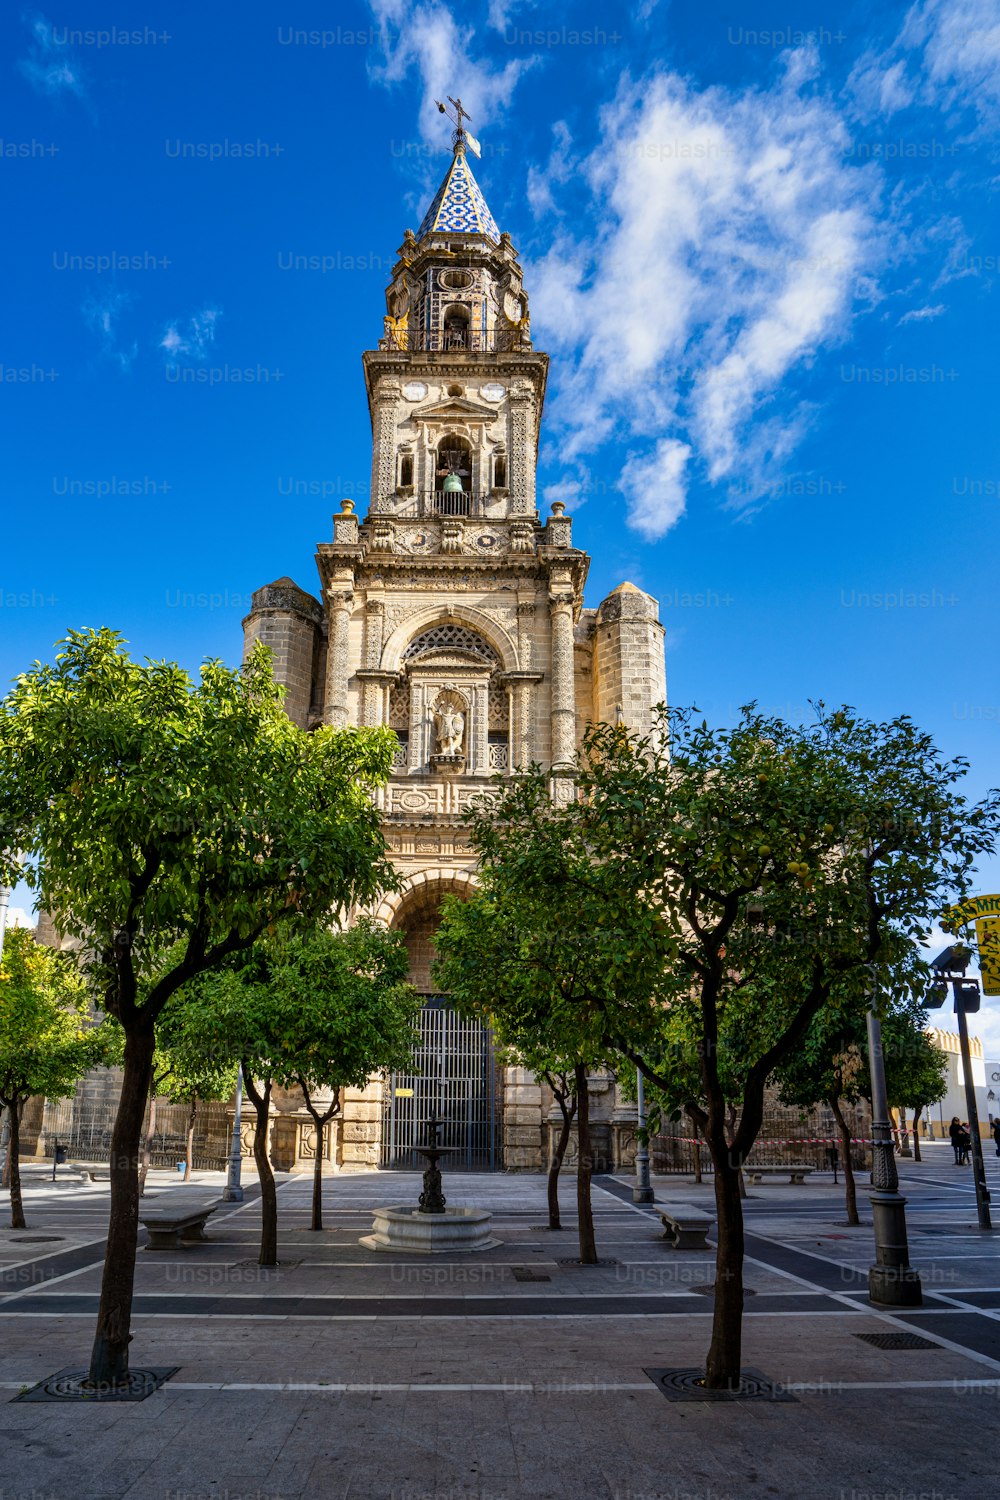 The San Miguel church in the old town of Jerez de la Frontera in Andalusia, Spain